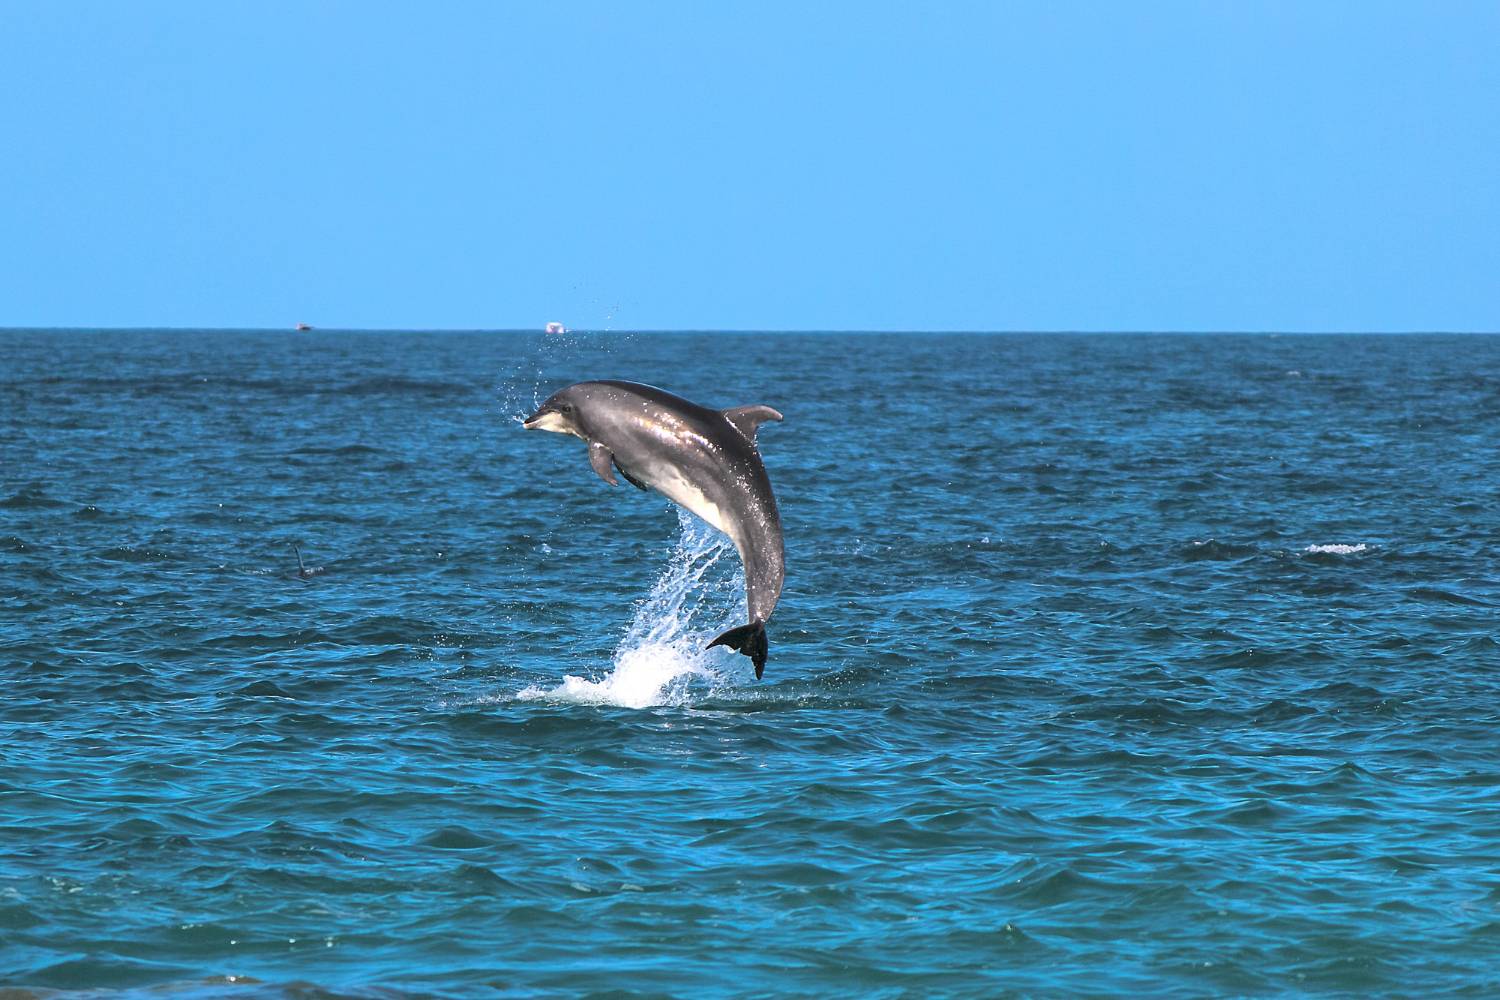 "A dolphin leaps gracefully above the ocean's surface, epitomizing the thrill of dolphin encounters."